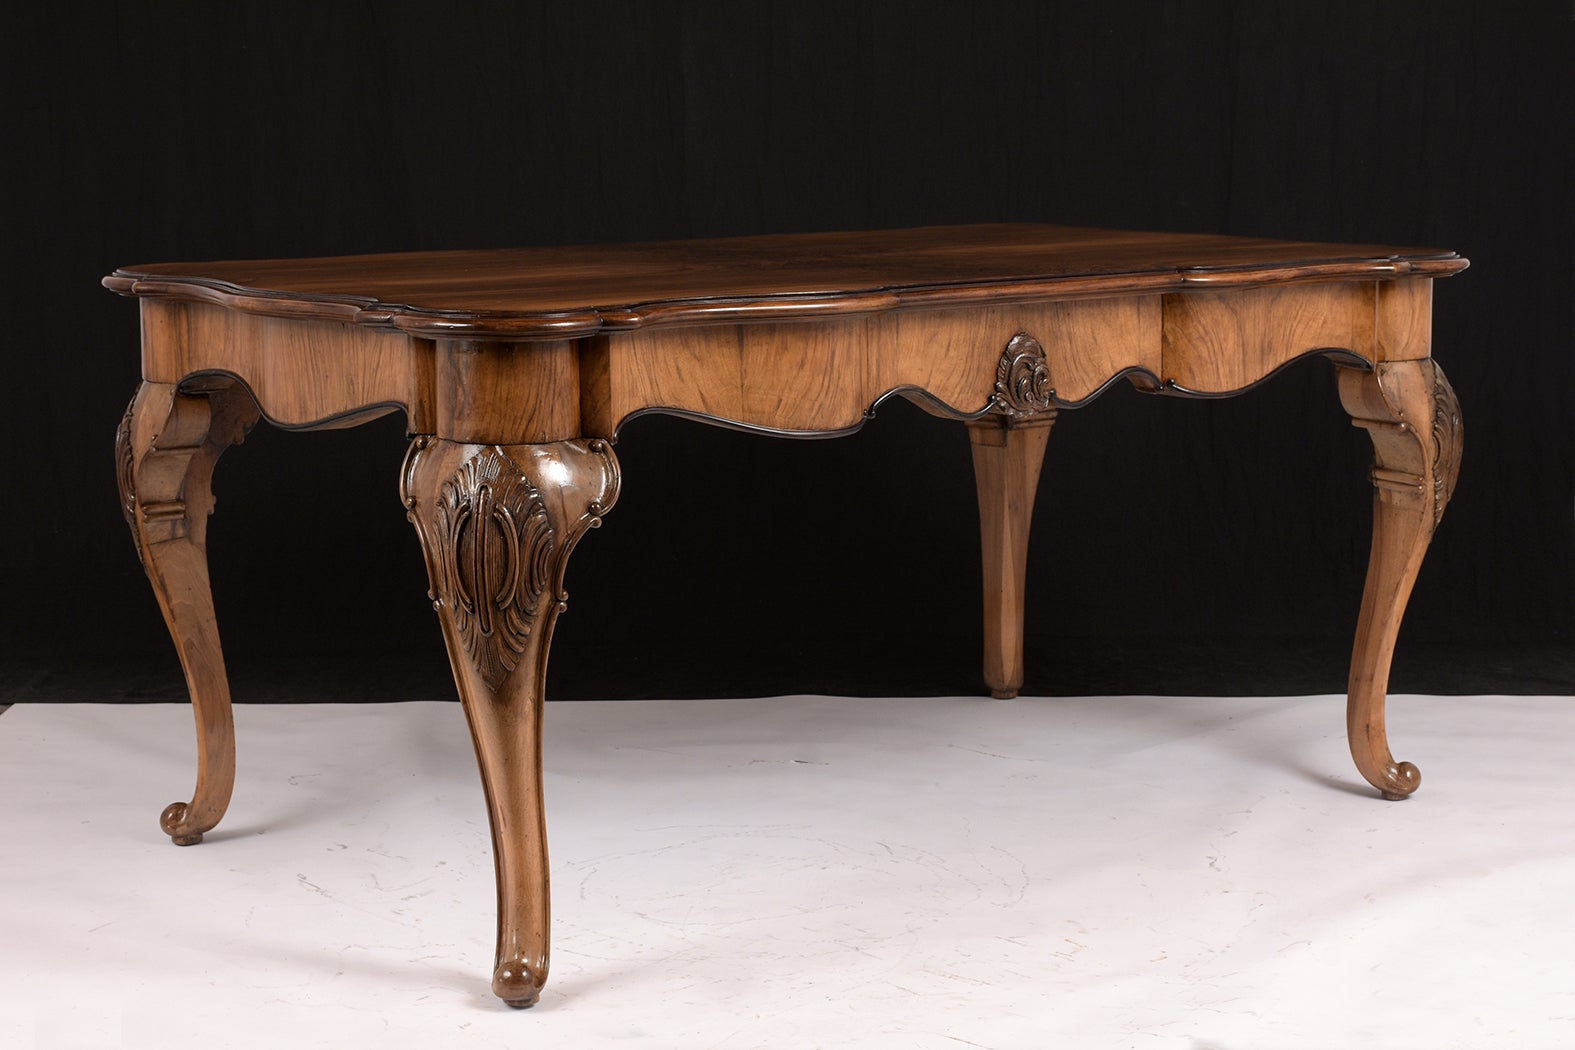 19th Century Late 19th-Century English Walnut Dining Table with Carved Cabriole Legs